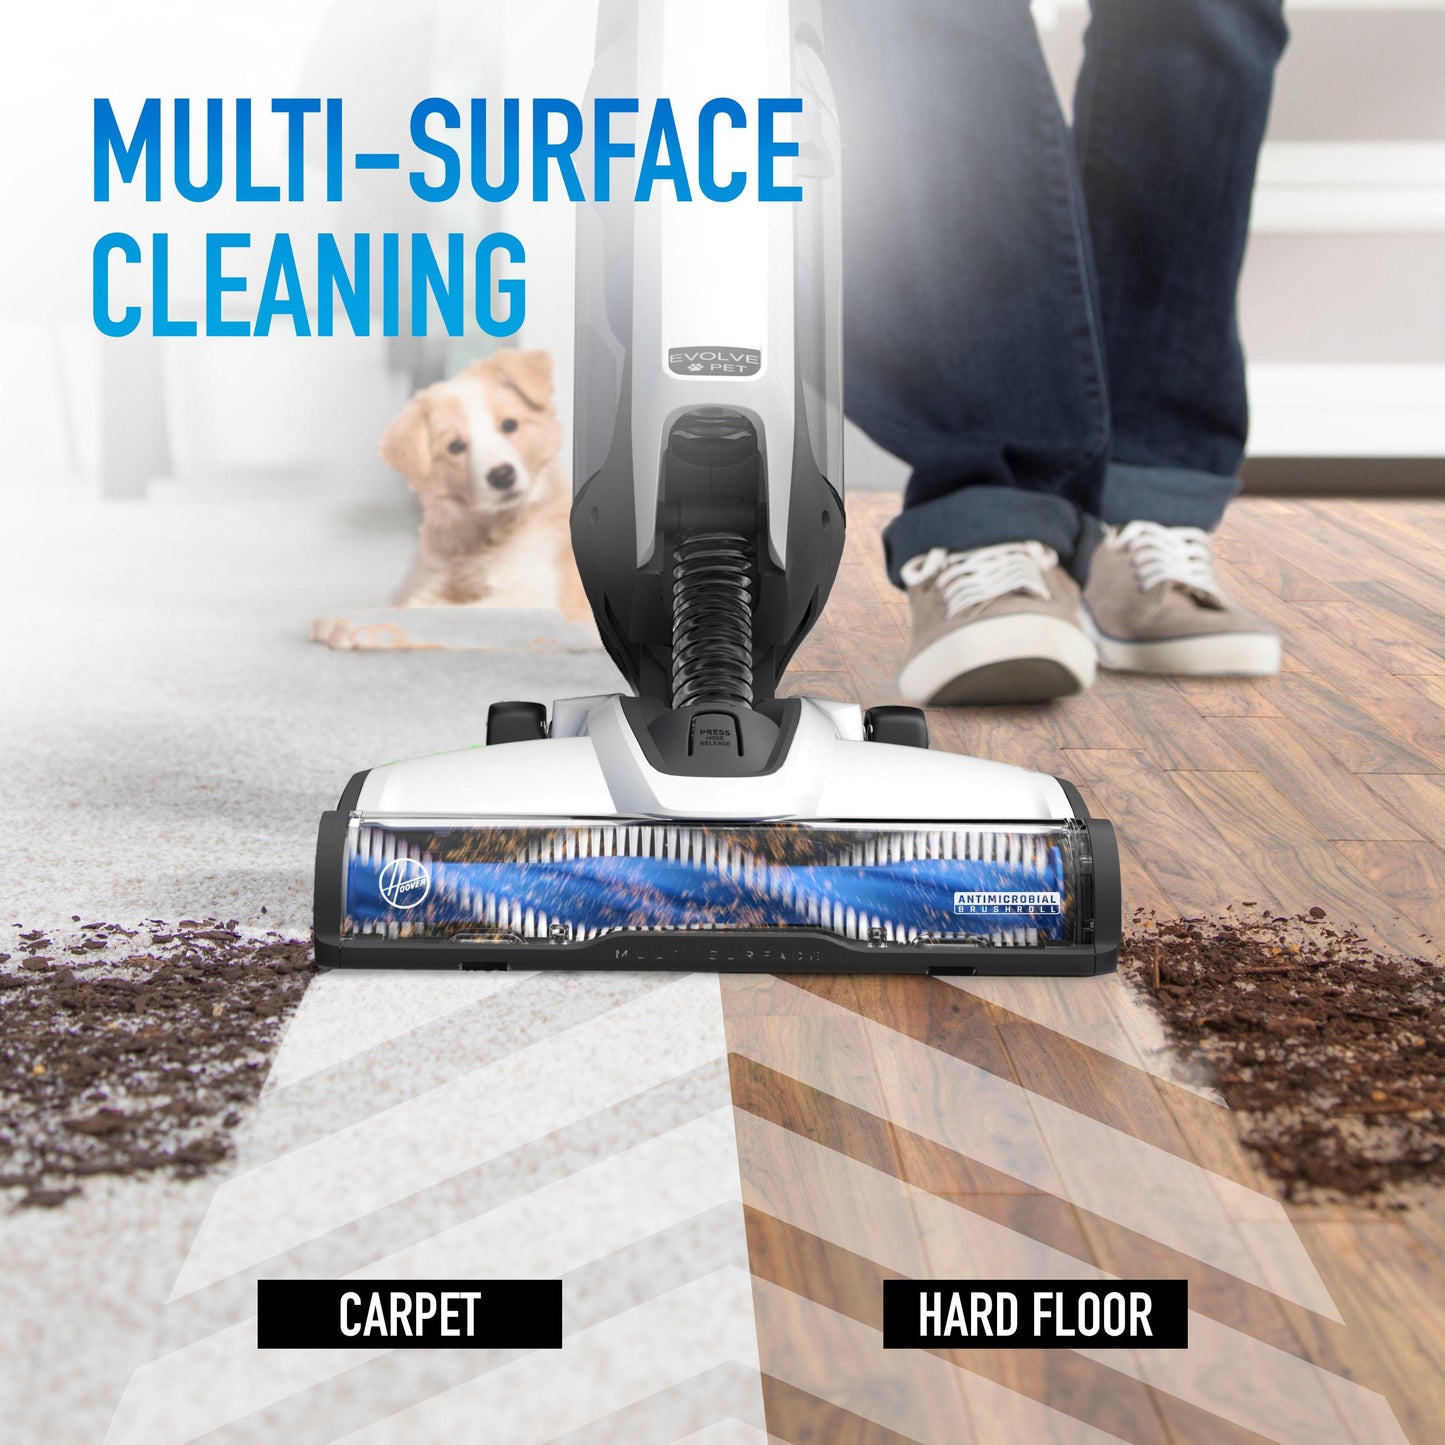 The Evolve Pet vacuums dirt off of both carpet and hard floors for multi-surface cleaning